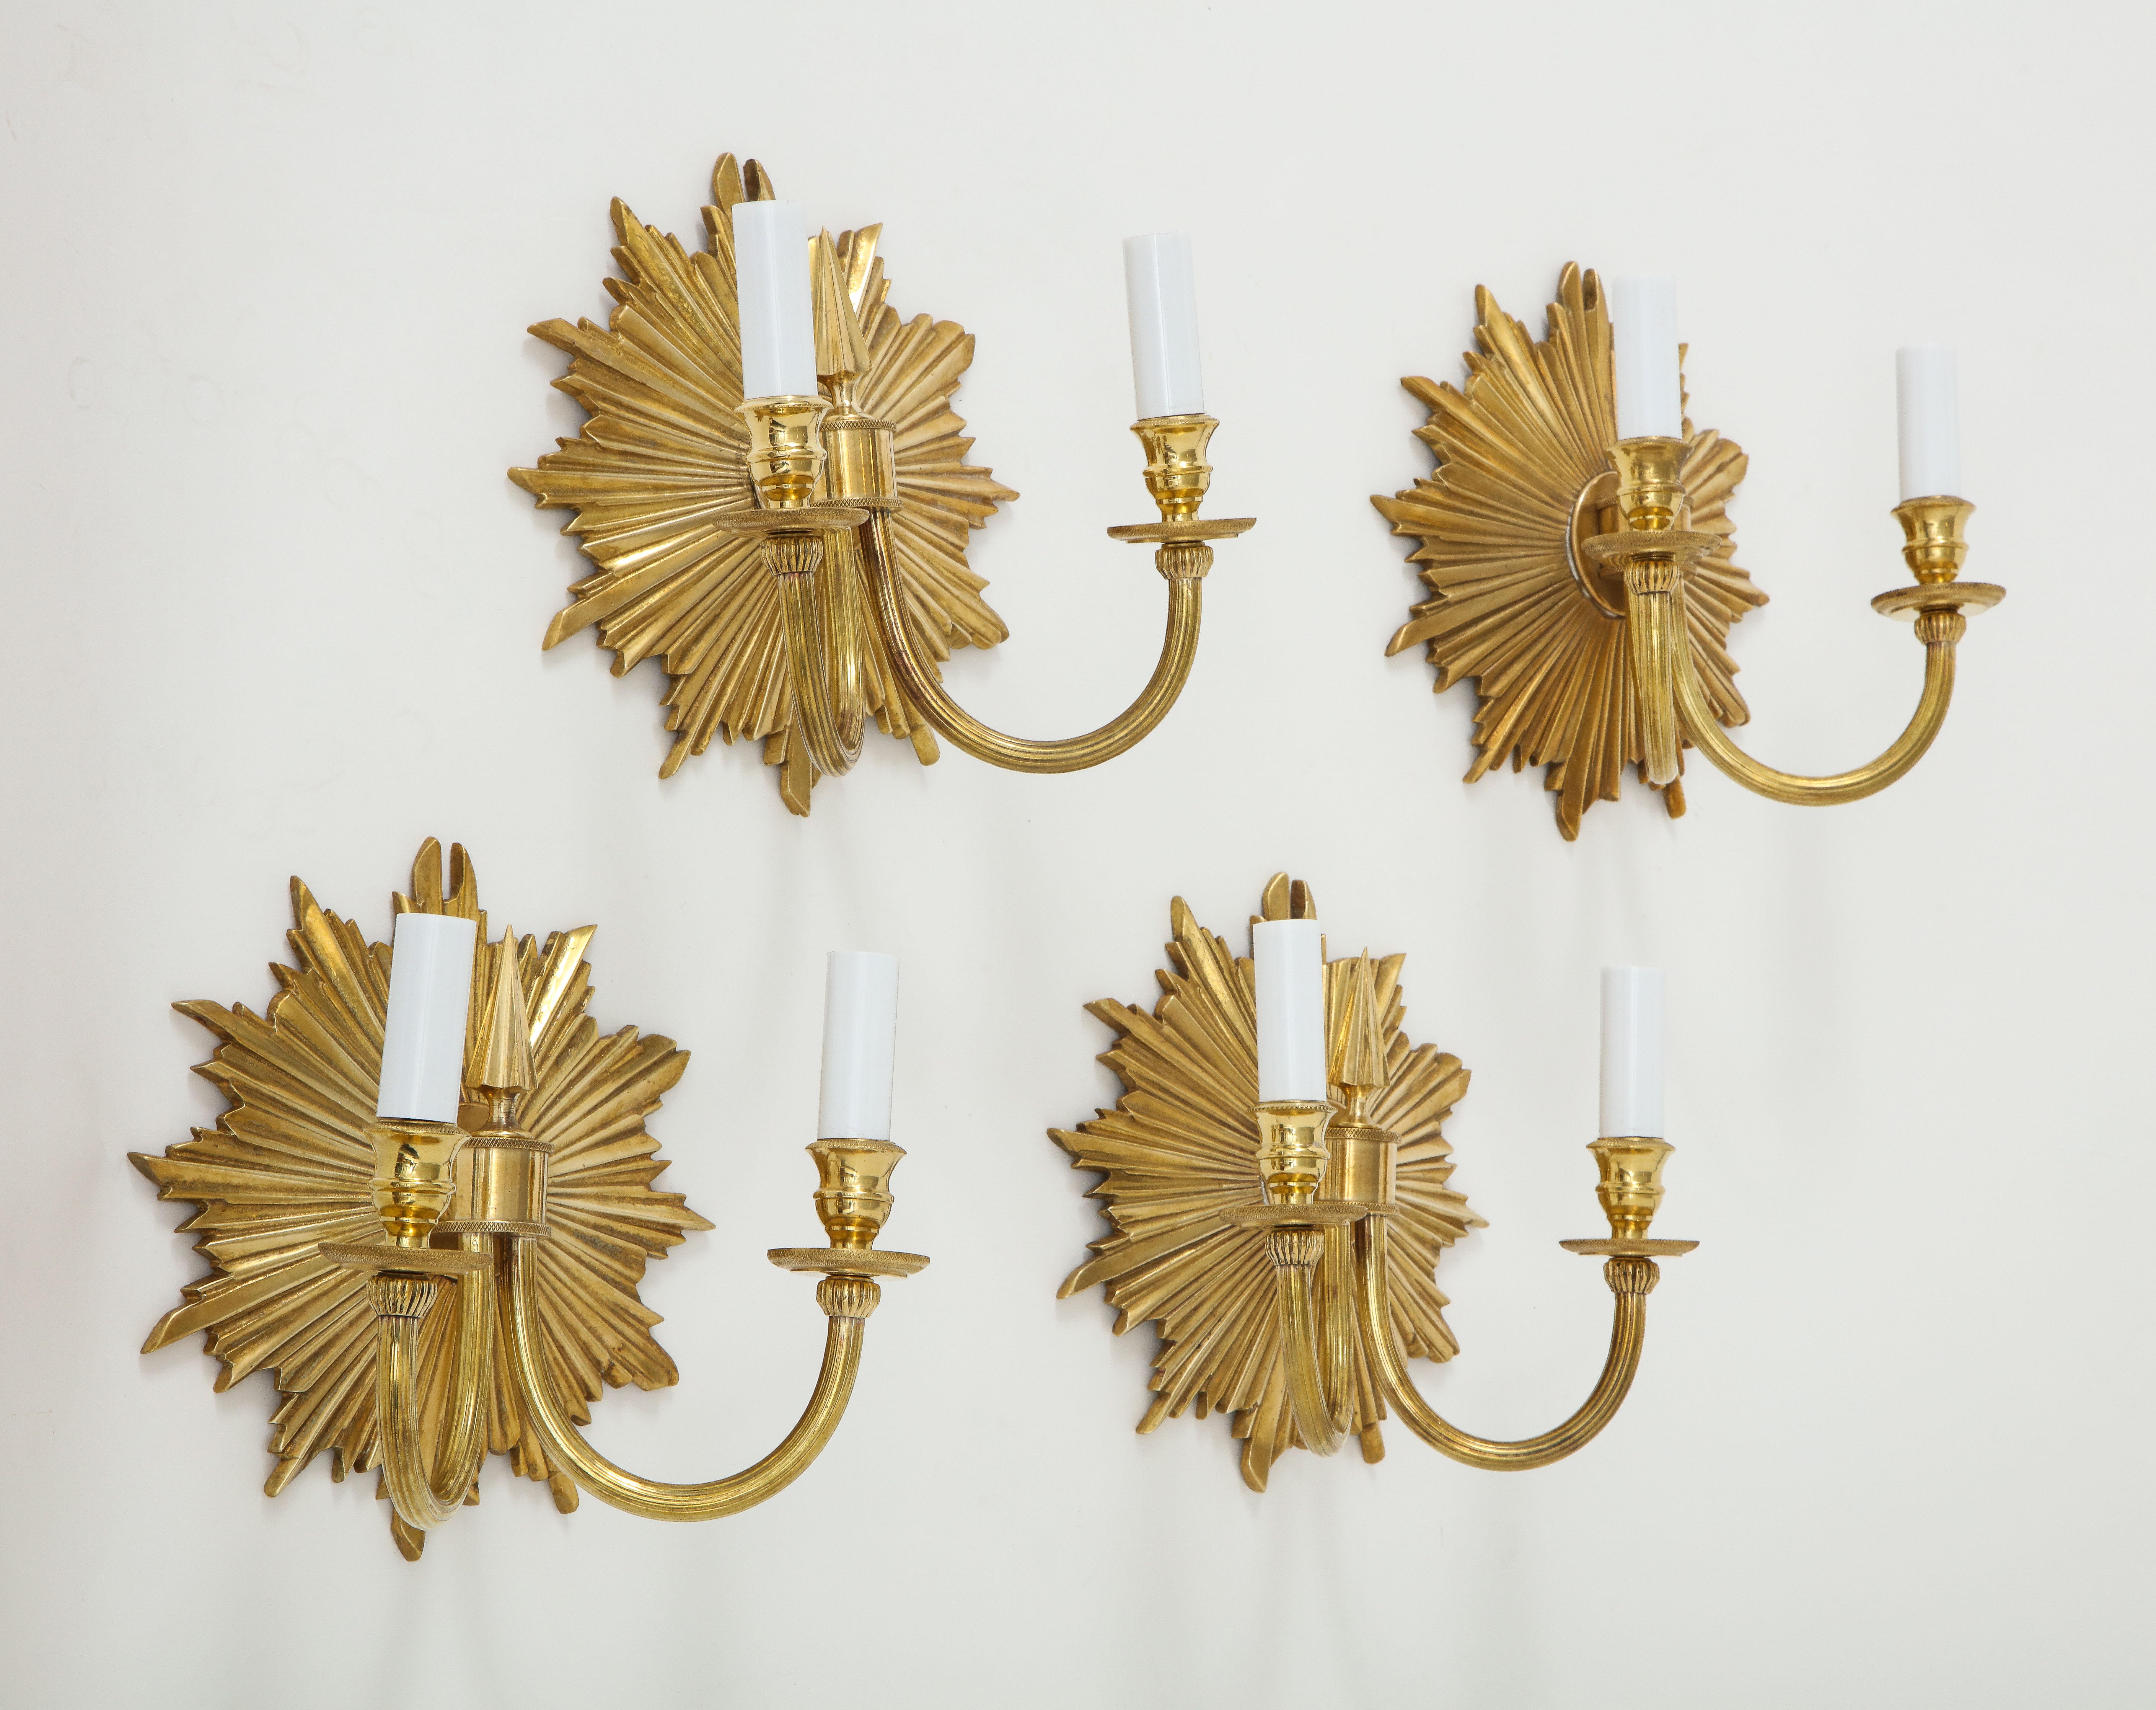 A set of four brass double-arm sconces with a lovely sunburst black plate and beautiful detailing throughout, including fluted arms and delicate beading on the bobeches (base supporting the lights). We have two pairs of these beauties they would be